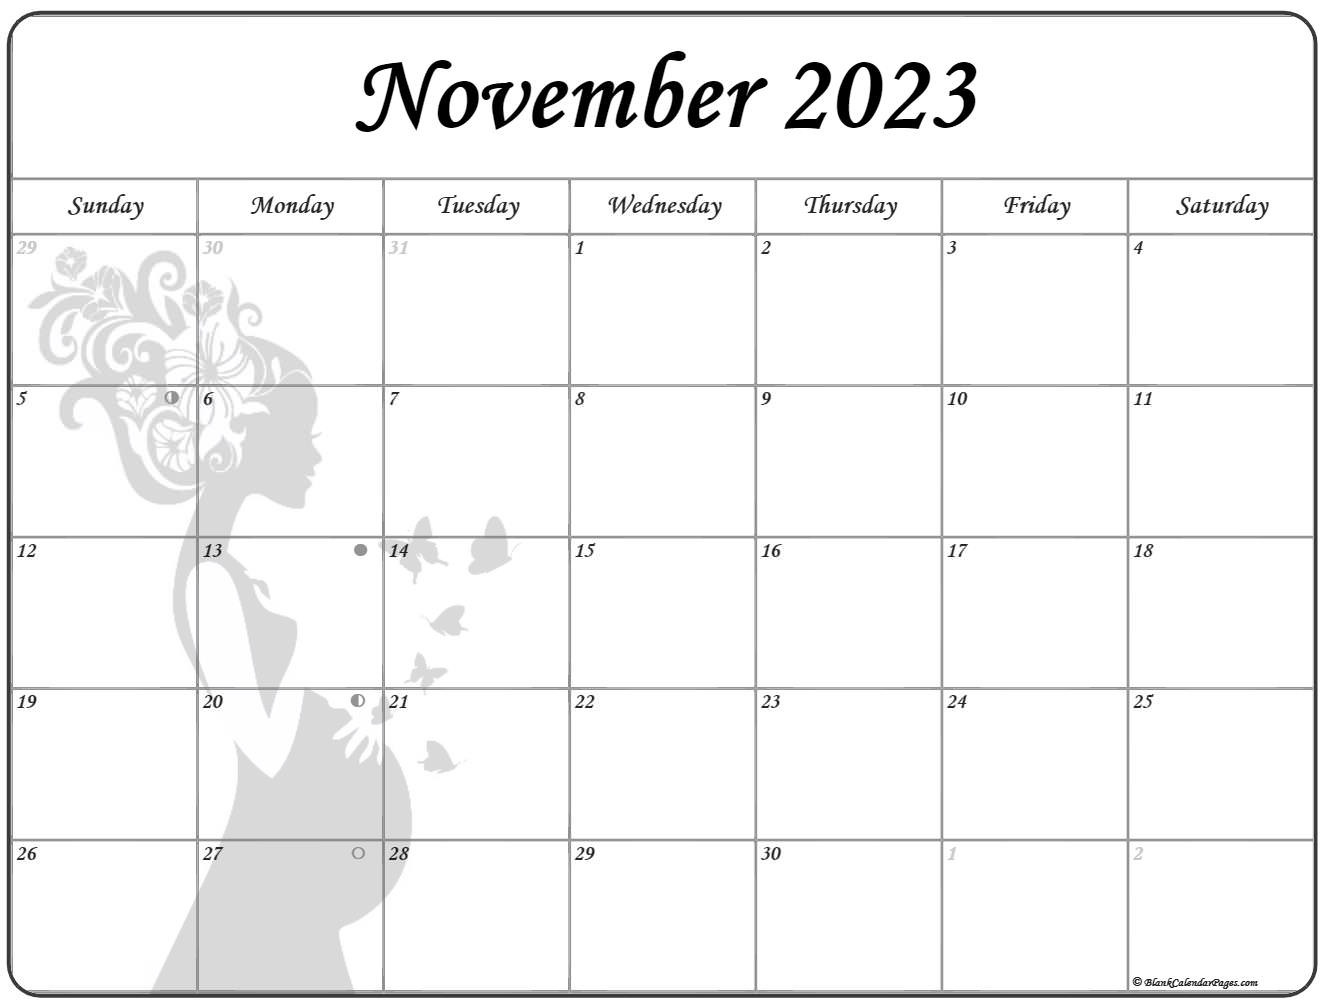 Collection of November 2023 photo calendars with image filters.